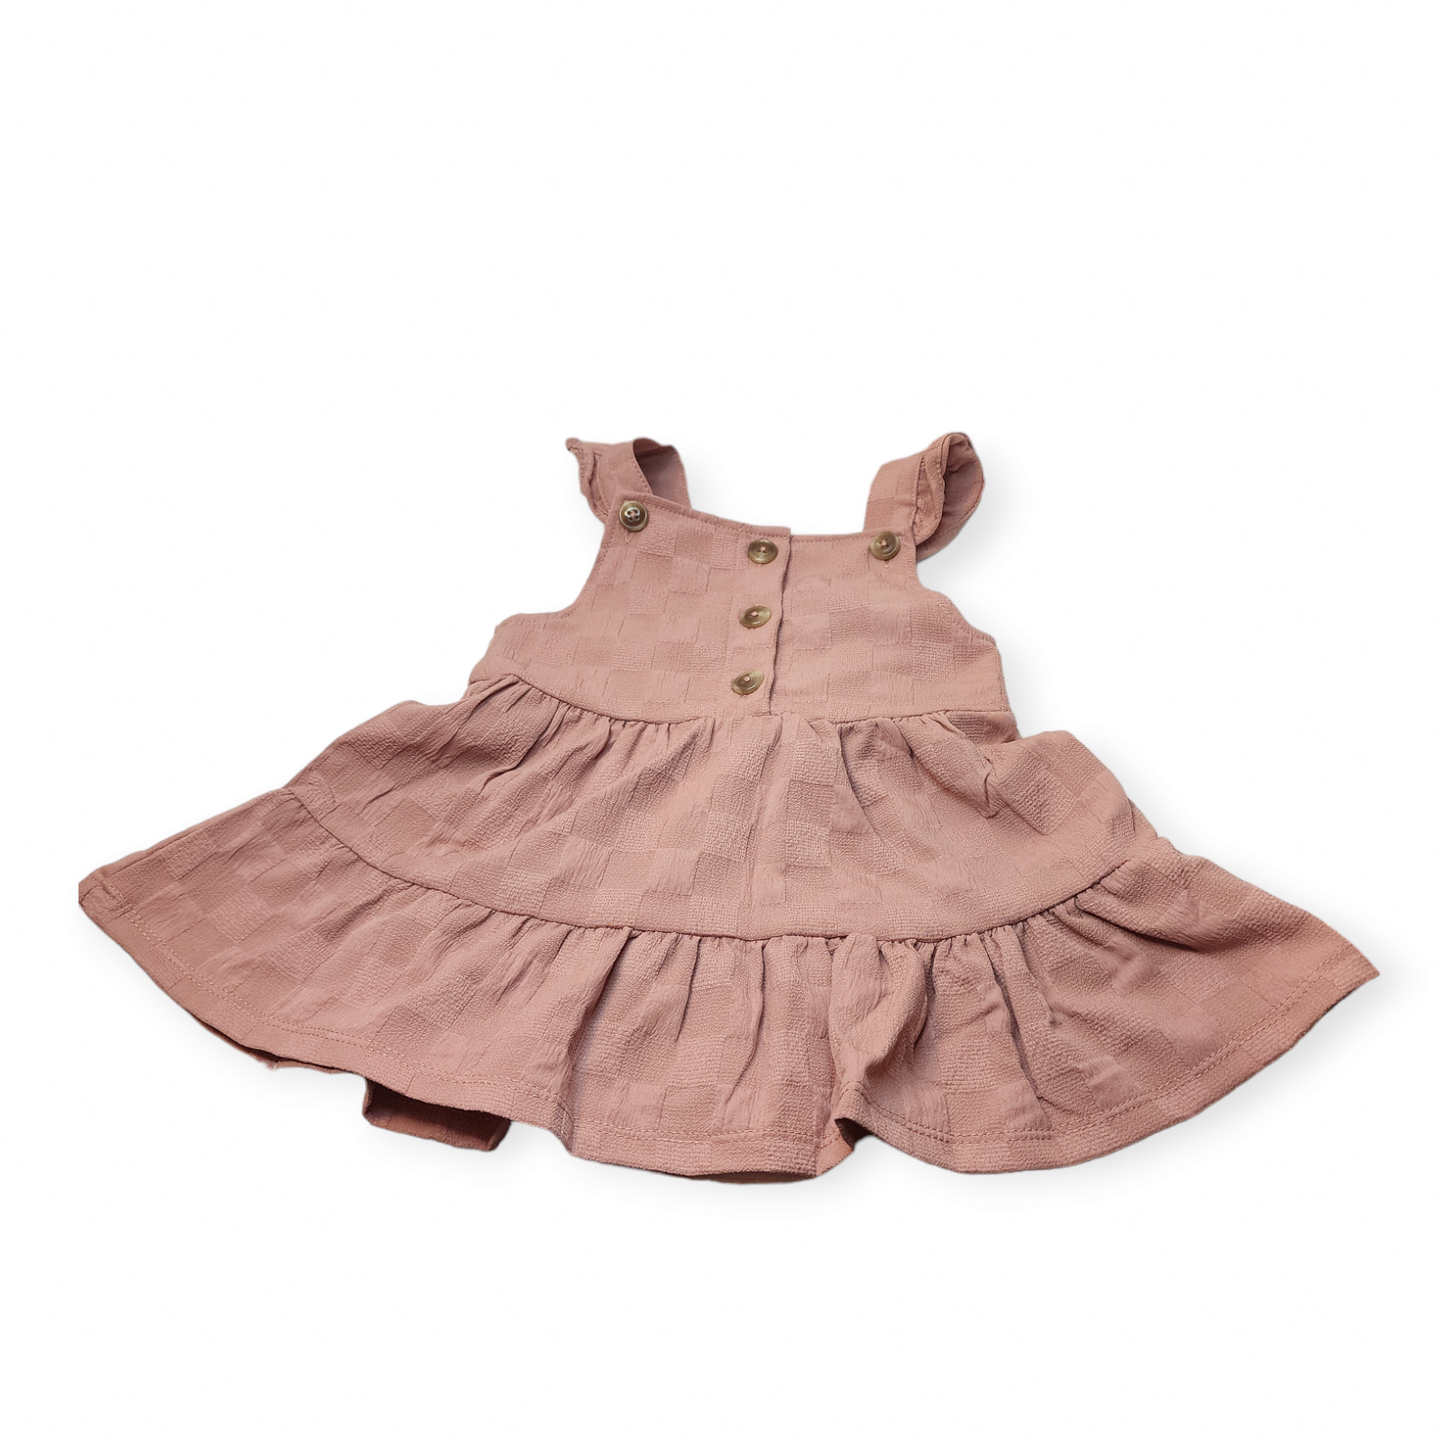 3pcs Baby Girl Sweet Floral Long Sleeve Skirt Set,by Nicole Miller .Size 12m Color: Mauve